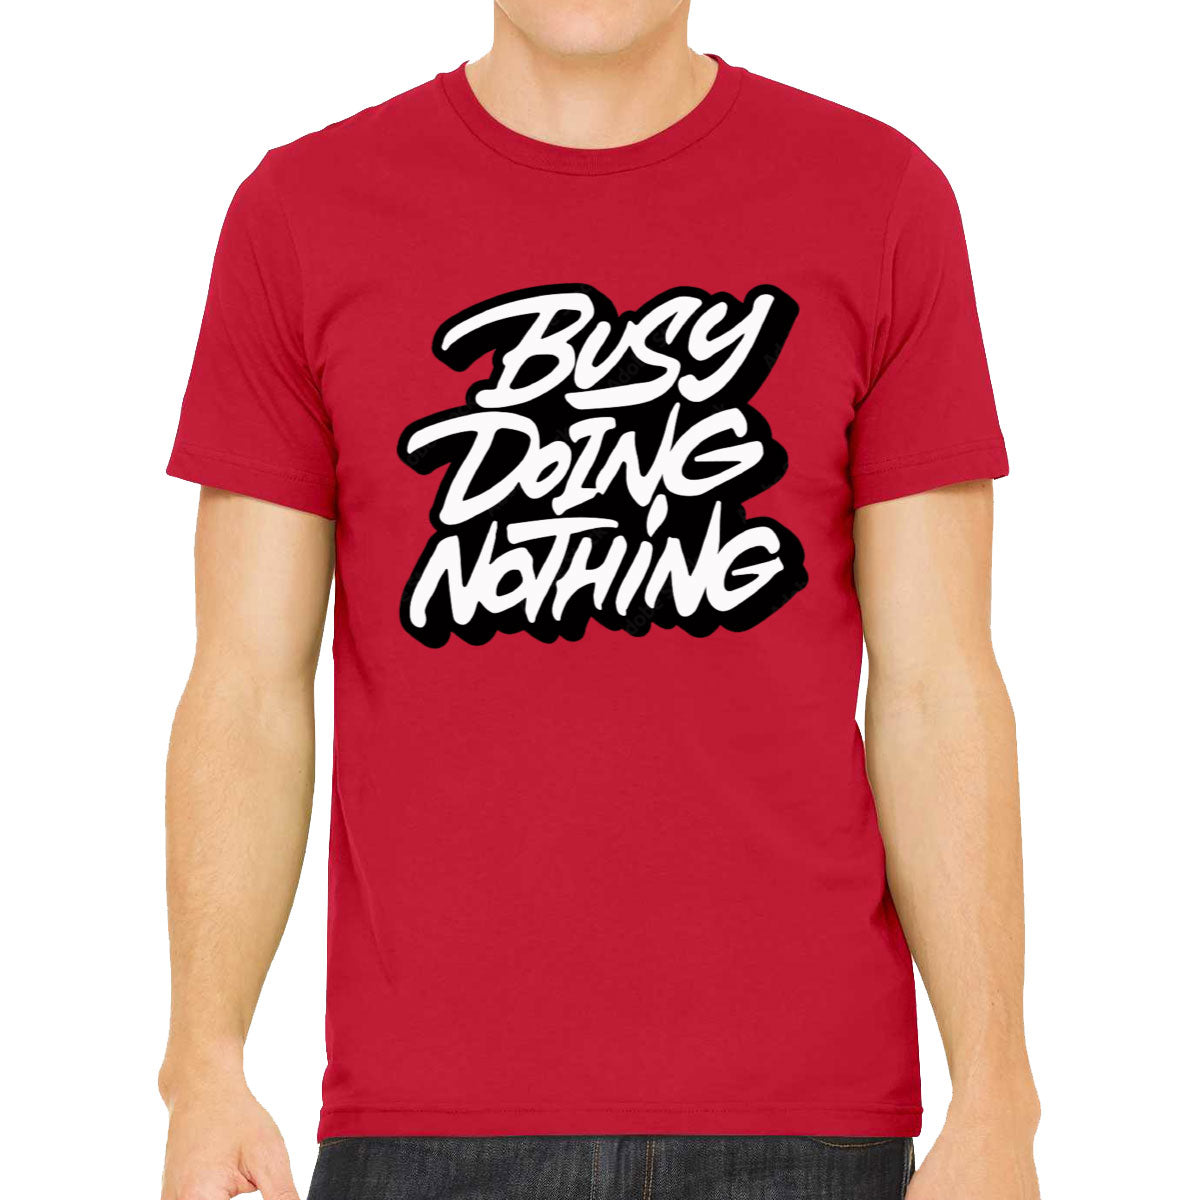 Busy Doing Nothing Men's T-shirt